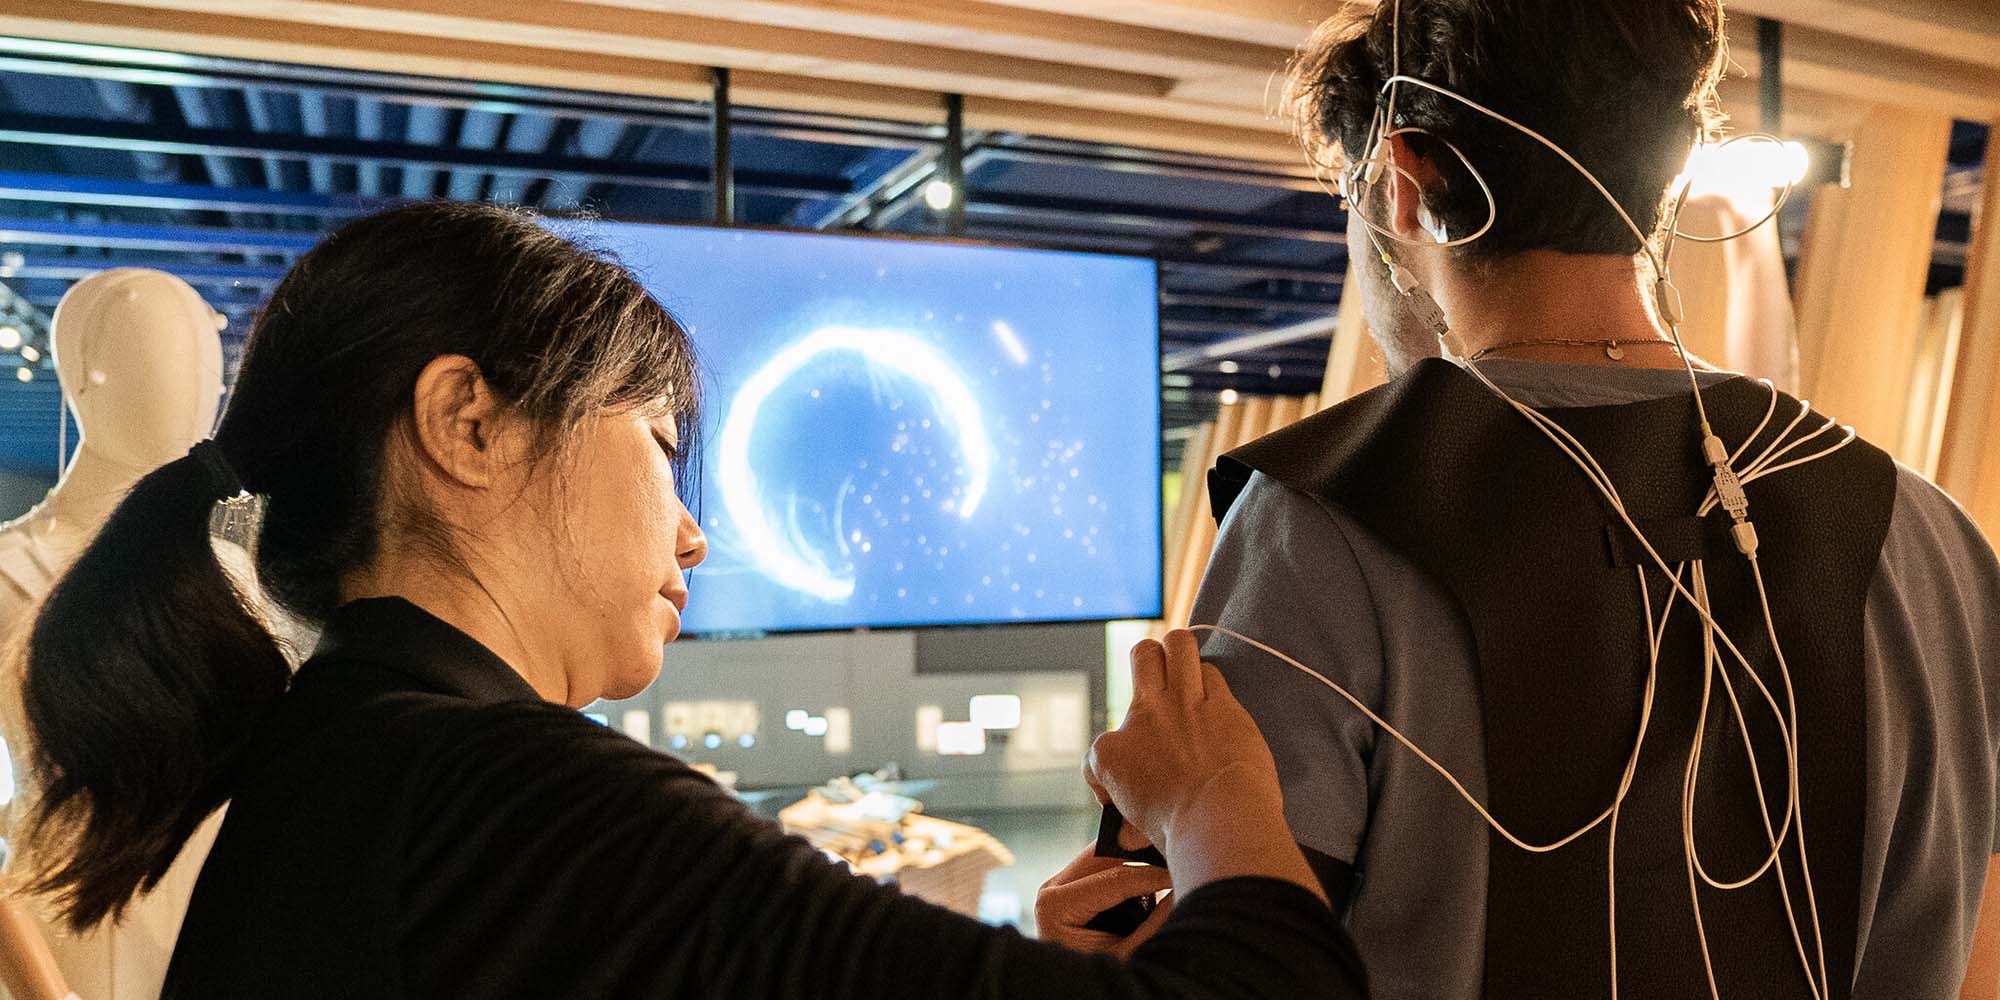 Futurelab Day visitors were also able to test Life Ink, a brand-new project by the Ars Electronica Futurelab in collaboration with technology company Wacom. For Life Ink, the Lab developed a wearable system for visualizing brain waves and body signals that makes the wearer